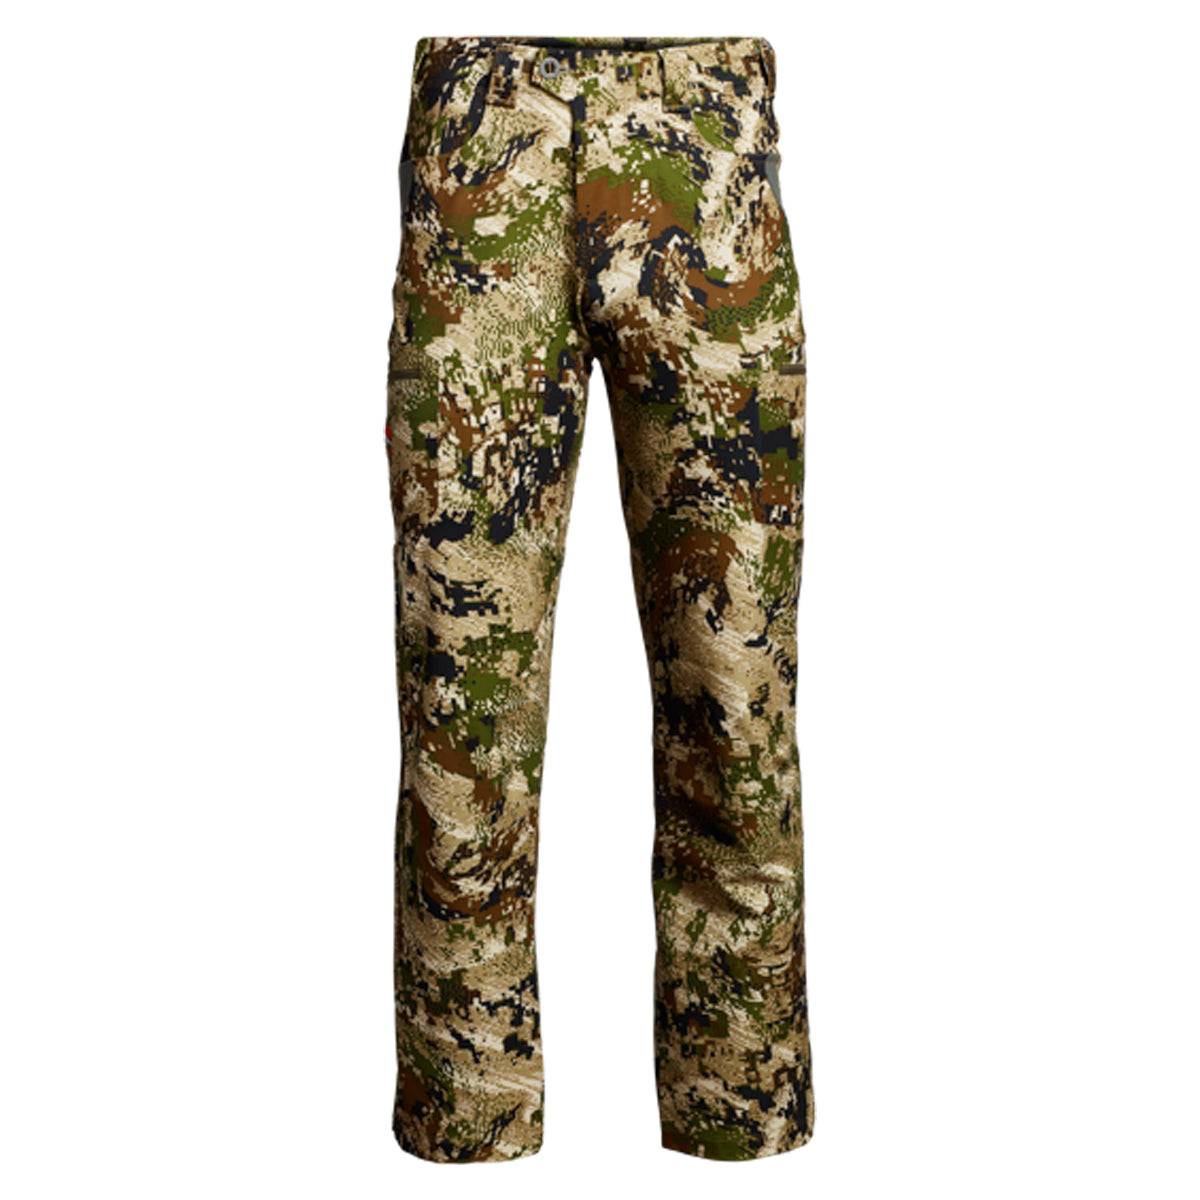 Sitka Traverse Pant in Optifade Subalpine by GOHUNT | Sitka - GOHUNT Shop